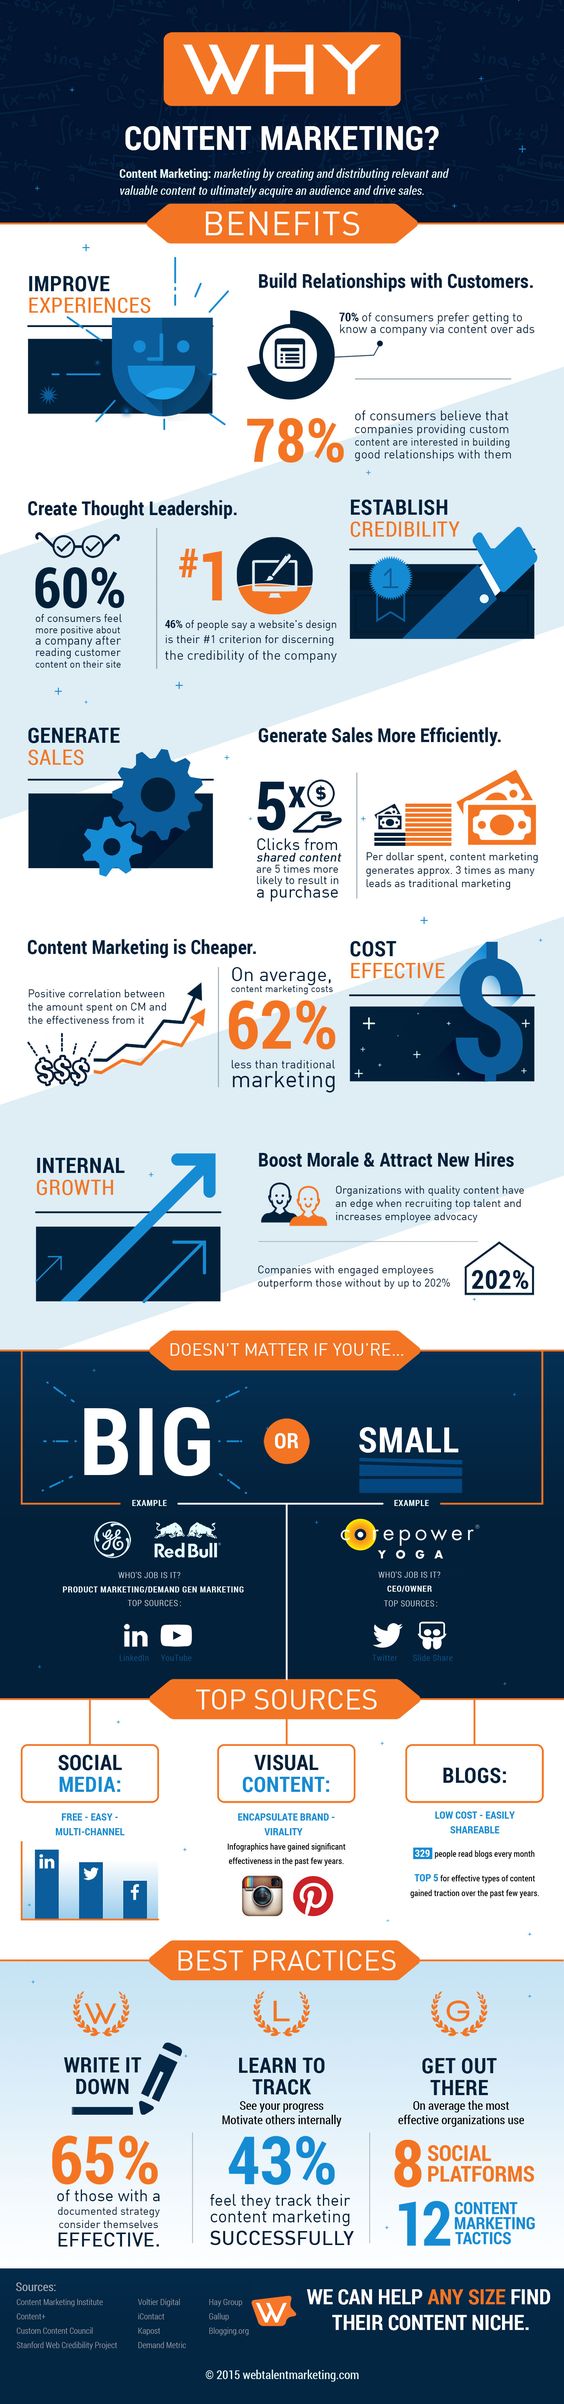 How Content Marketing Can Help Increase Sales And Revenue 